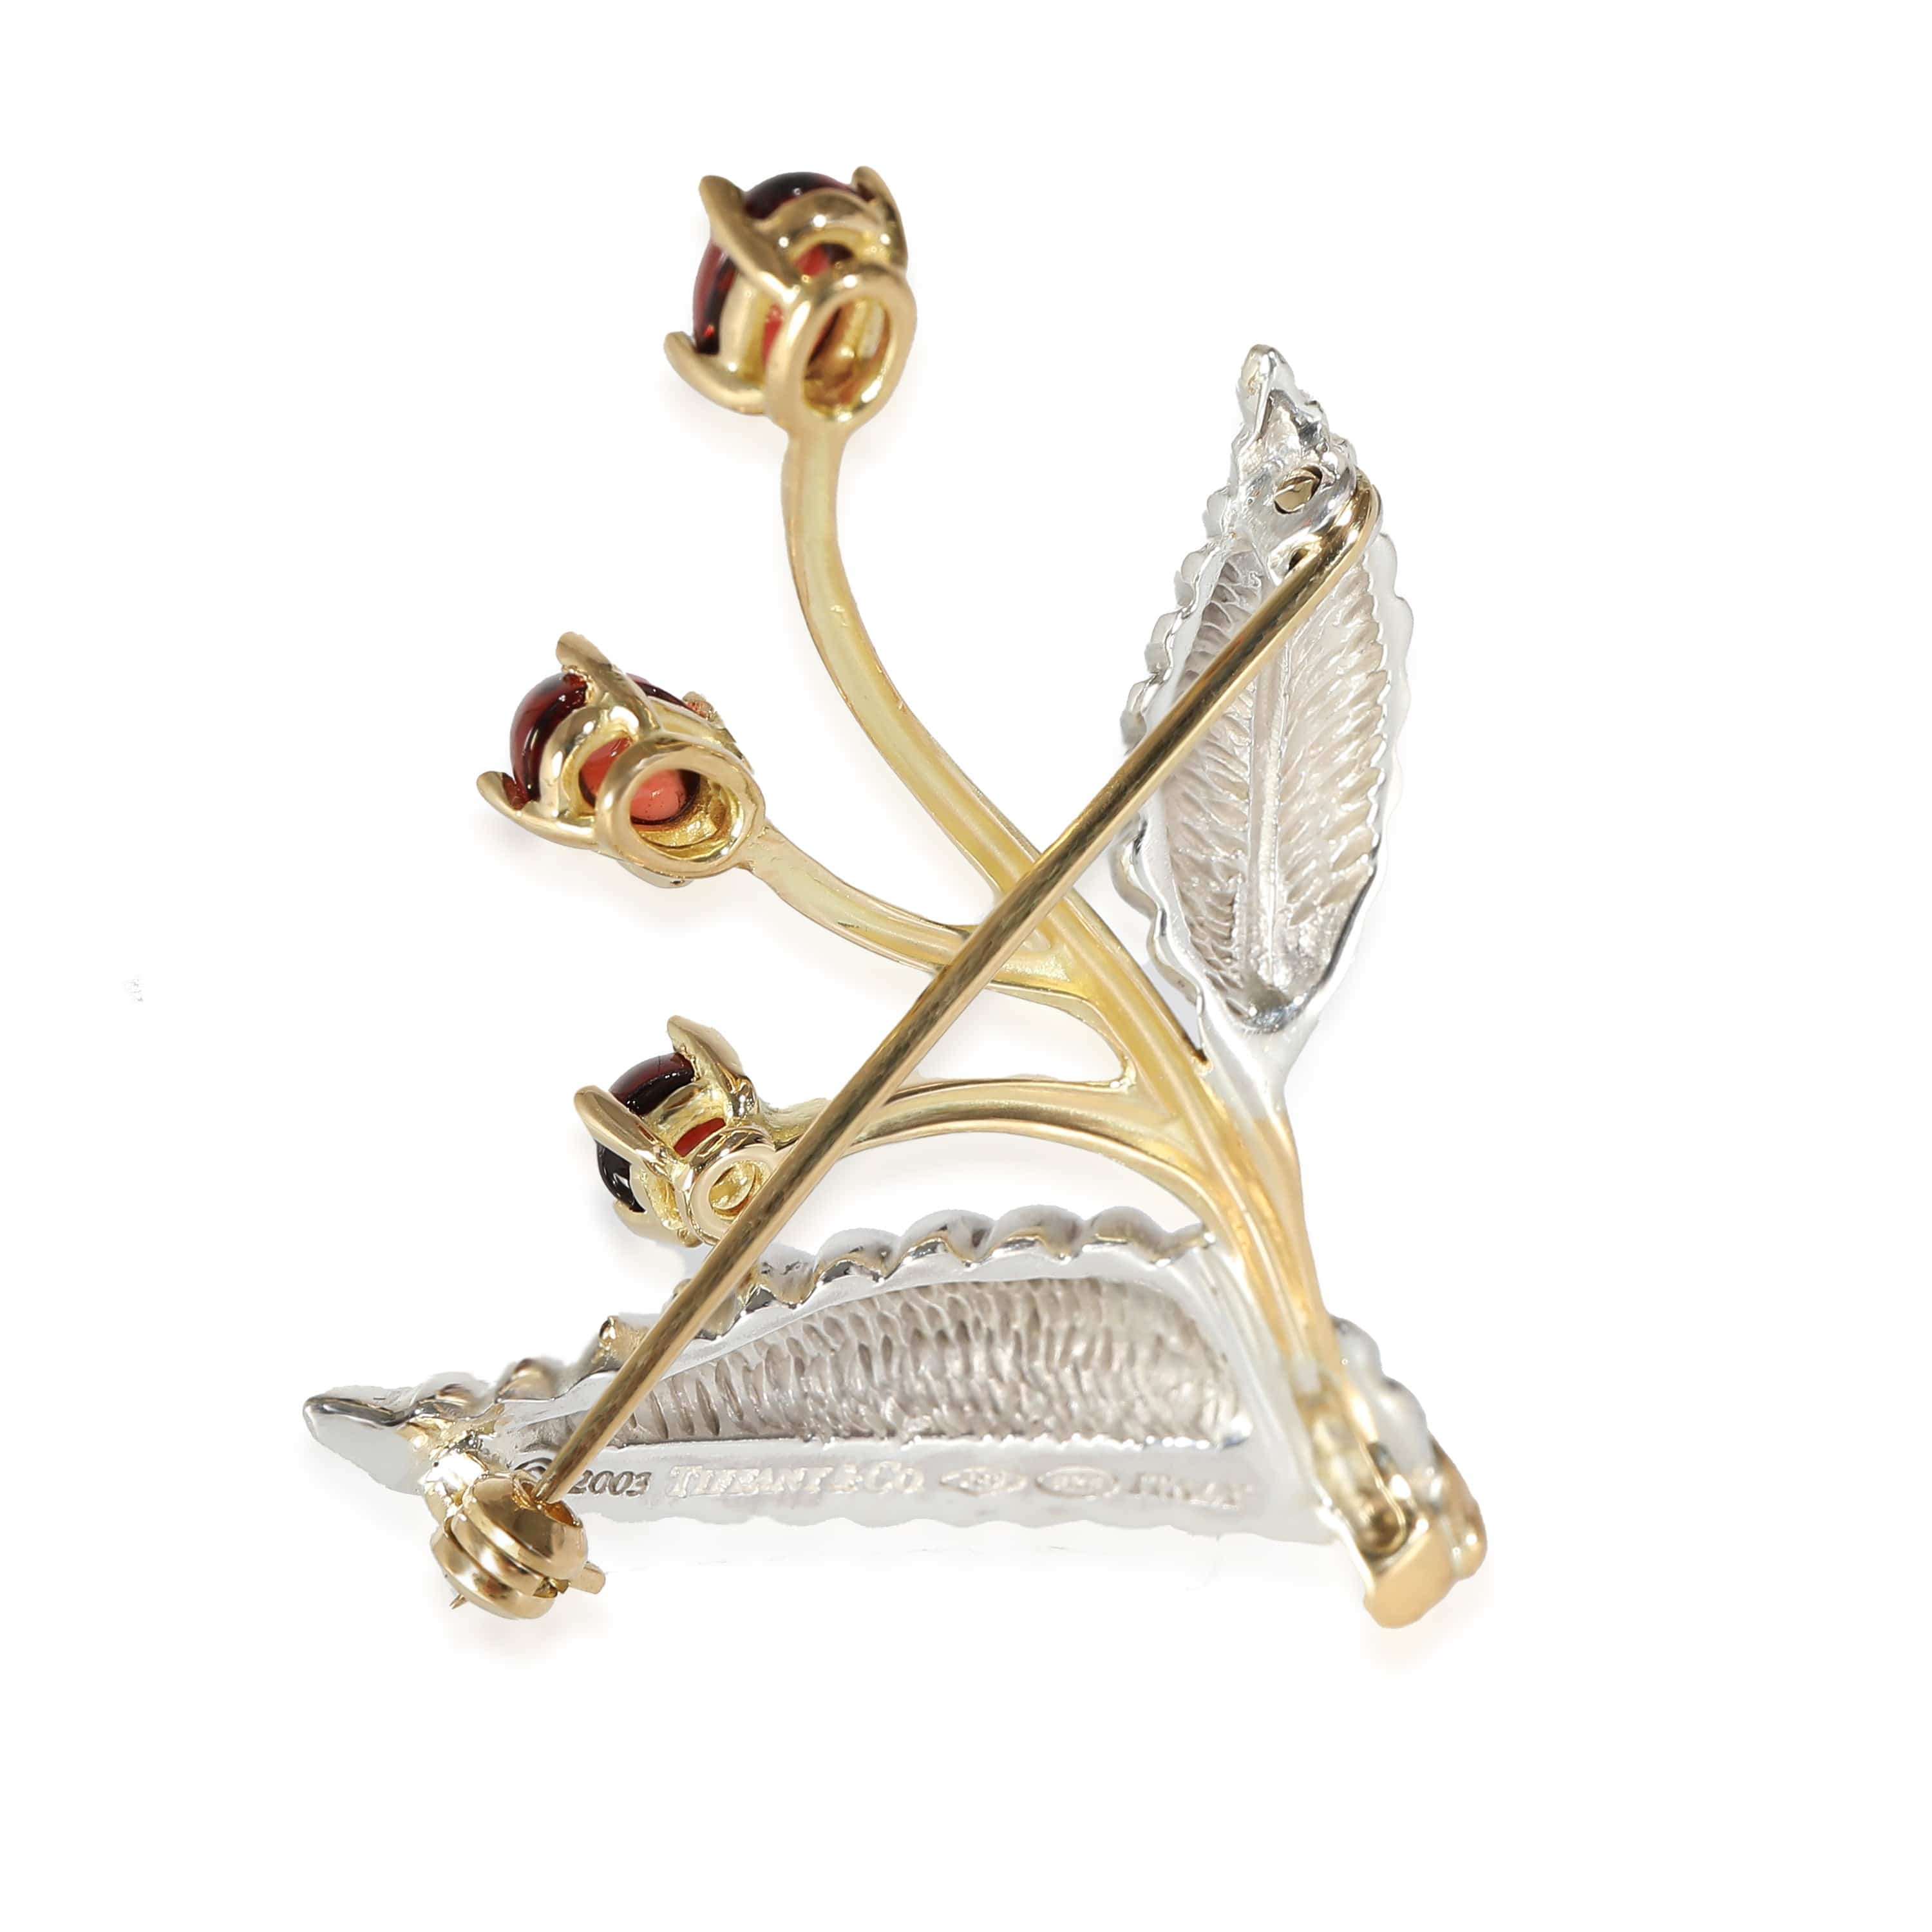 Tiffany & Co. Tiffany & Co. Vintage Brooch in 18k Yellow Gold/Sterling Silver